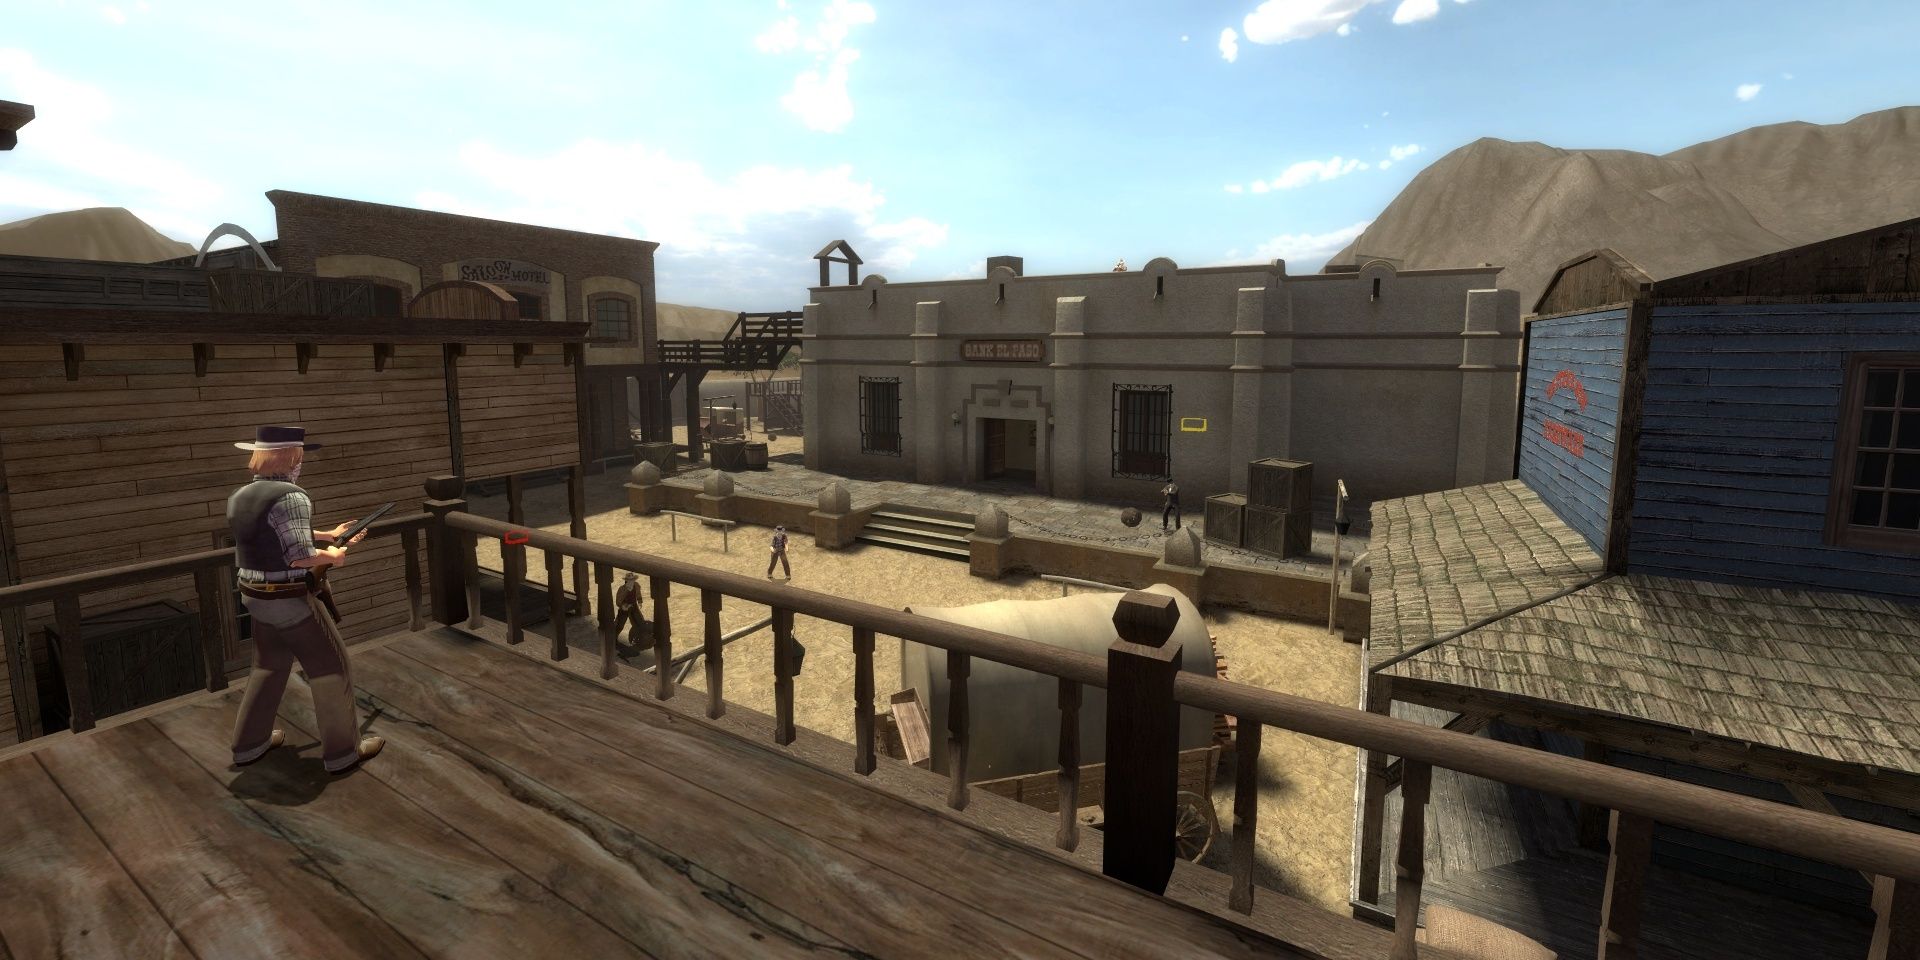 A wild west town that includes a hotel and bank while individuals holding guns surround the town in Fistful of Frags